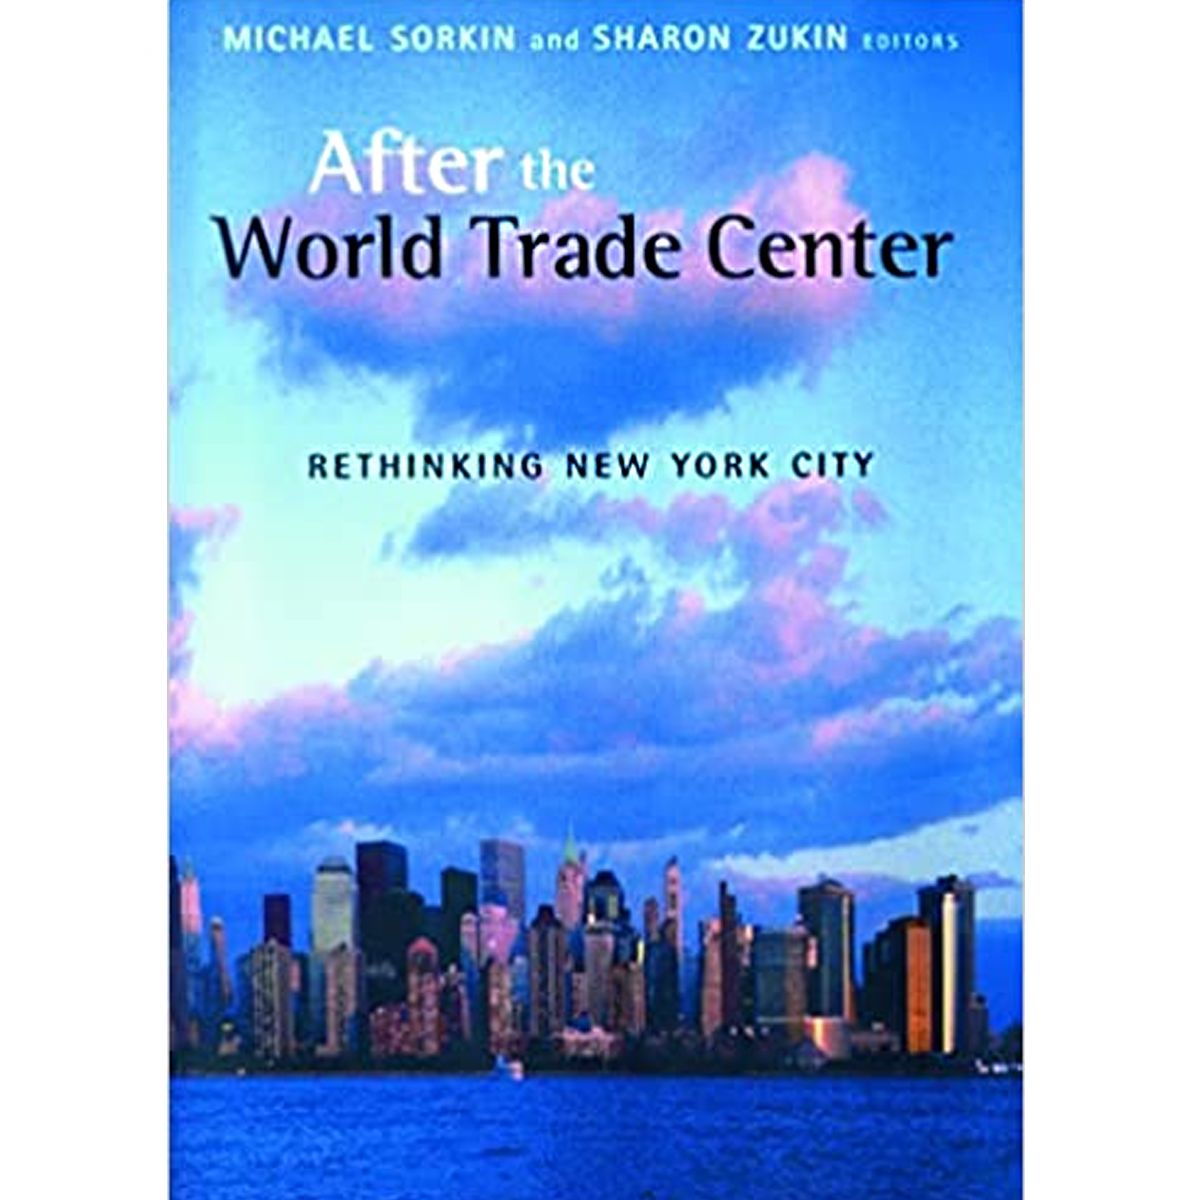 After theWorld Trade Center